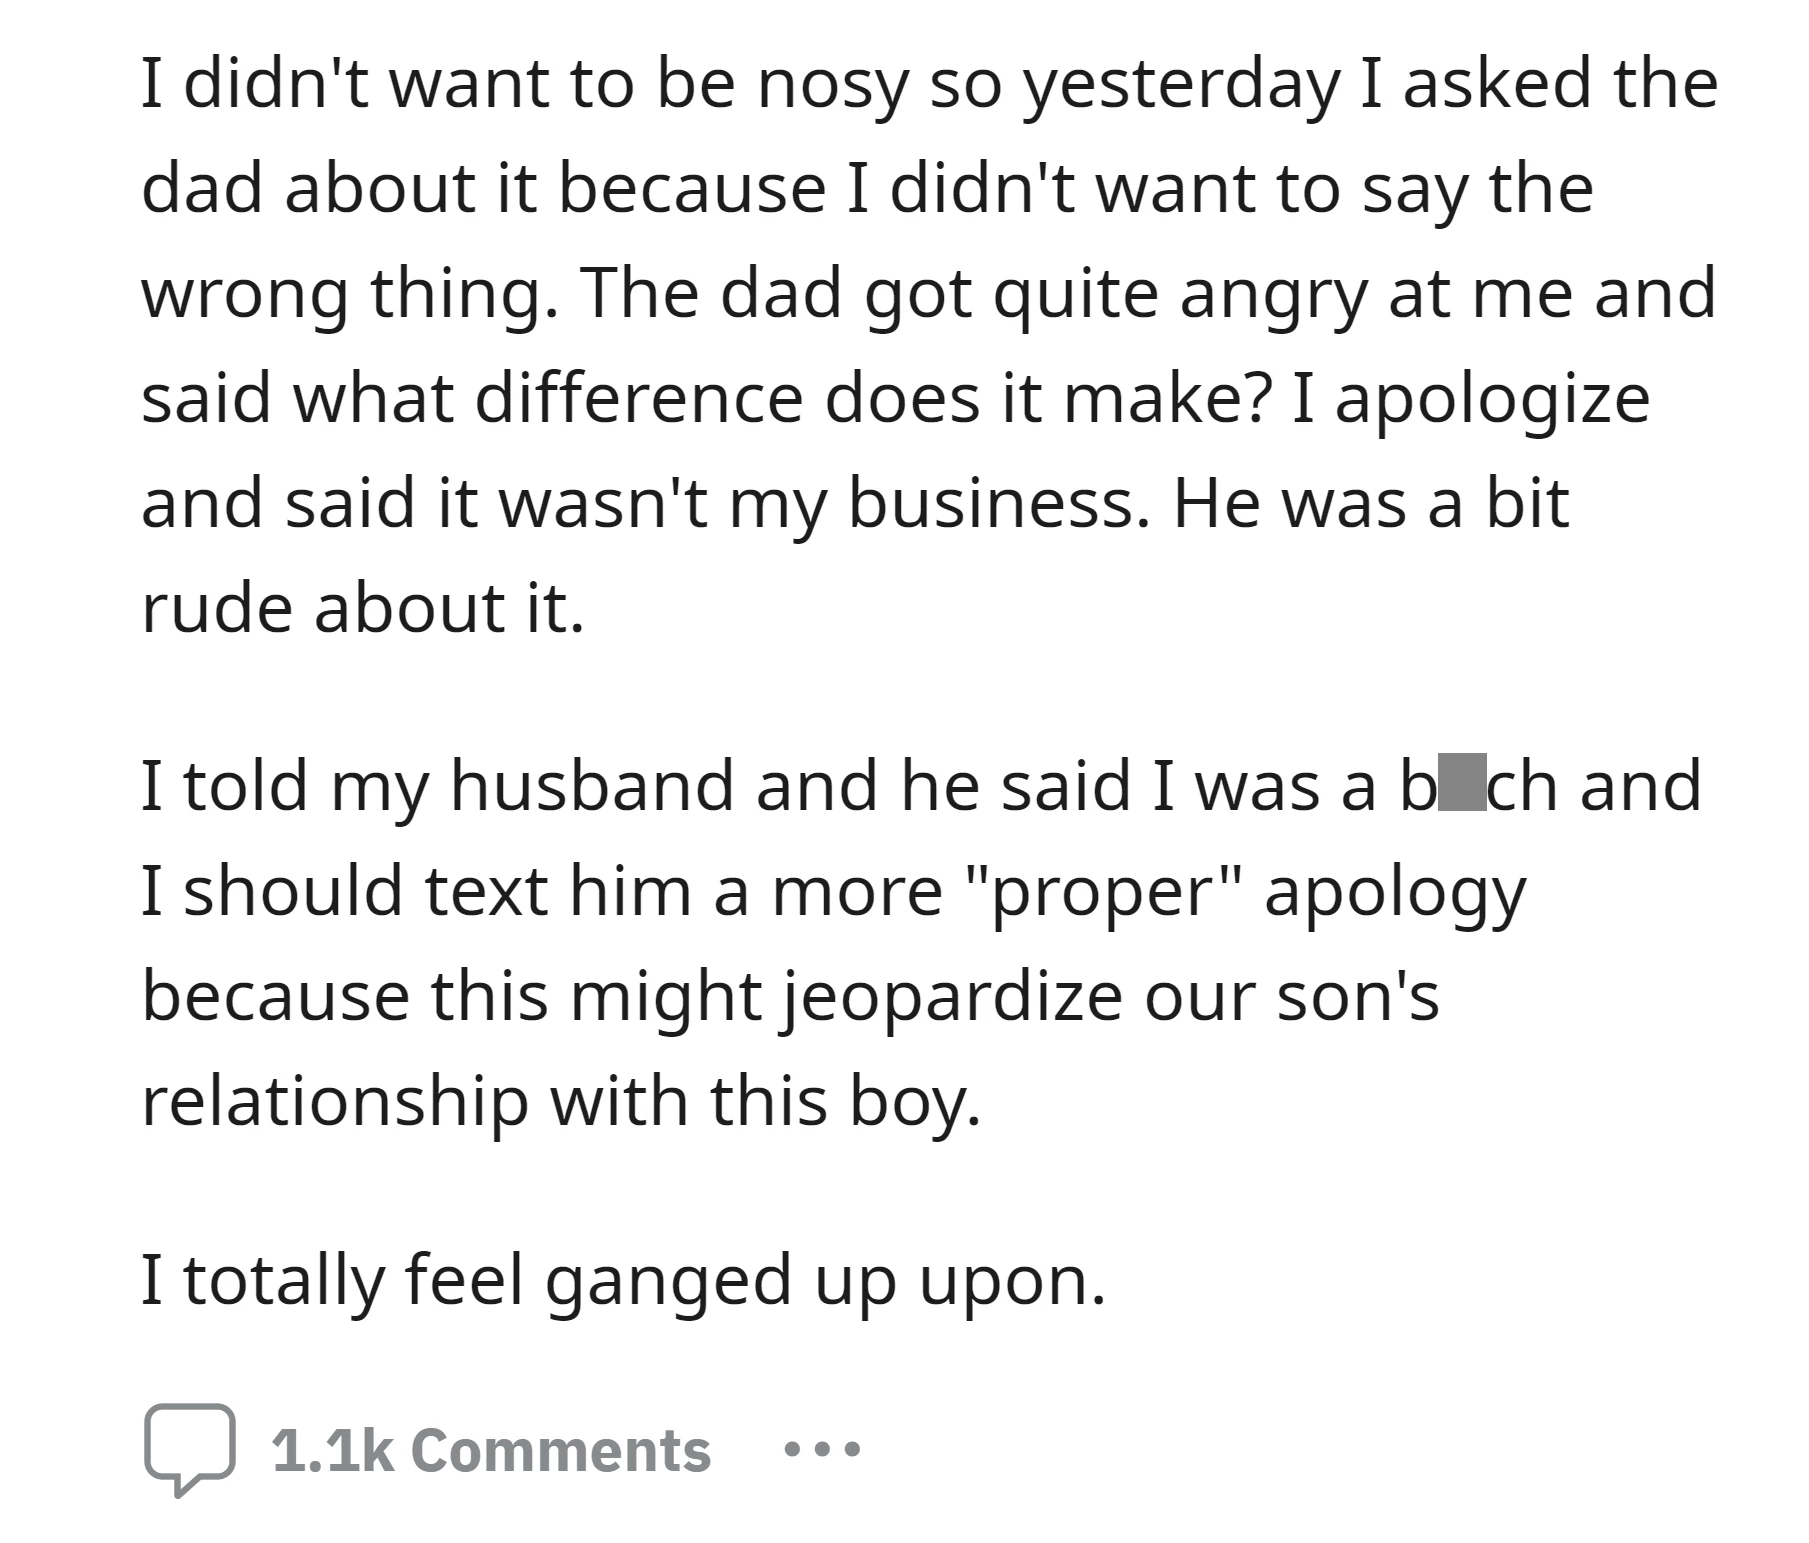 OP asked the new neighbor dad if his oldest son was his bio's son because his appearance didn't look like him, which made the dad angry